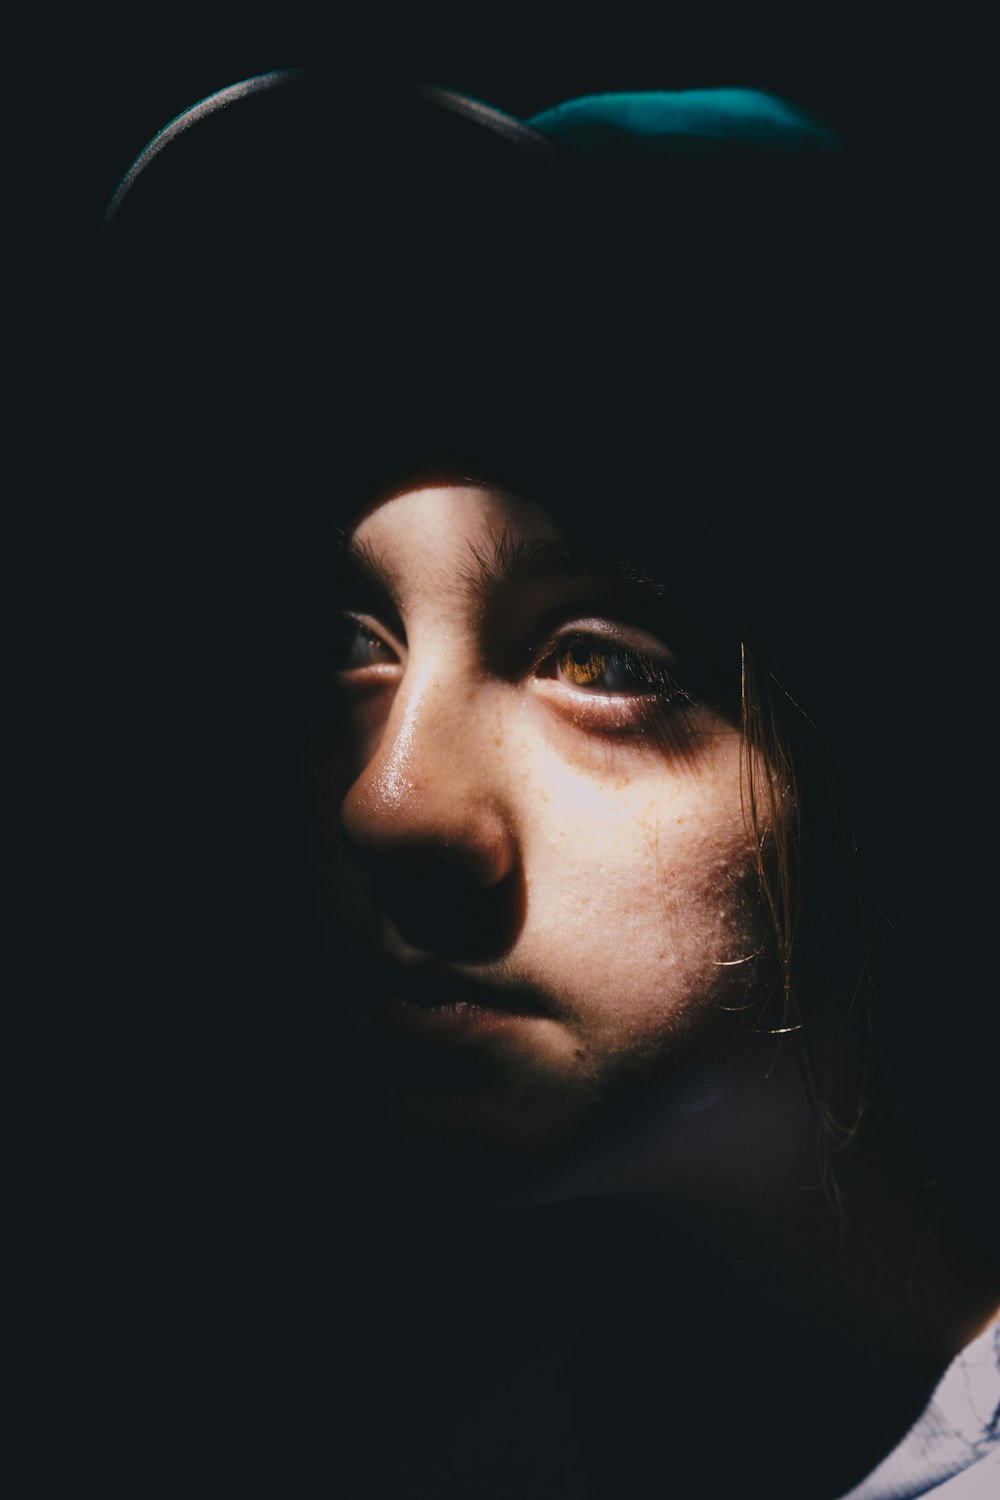 a woman's face is shown in the dark